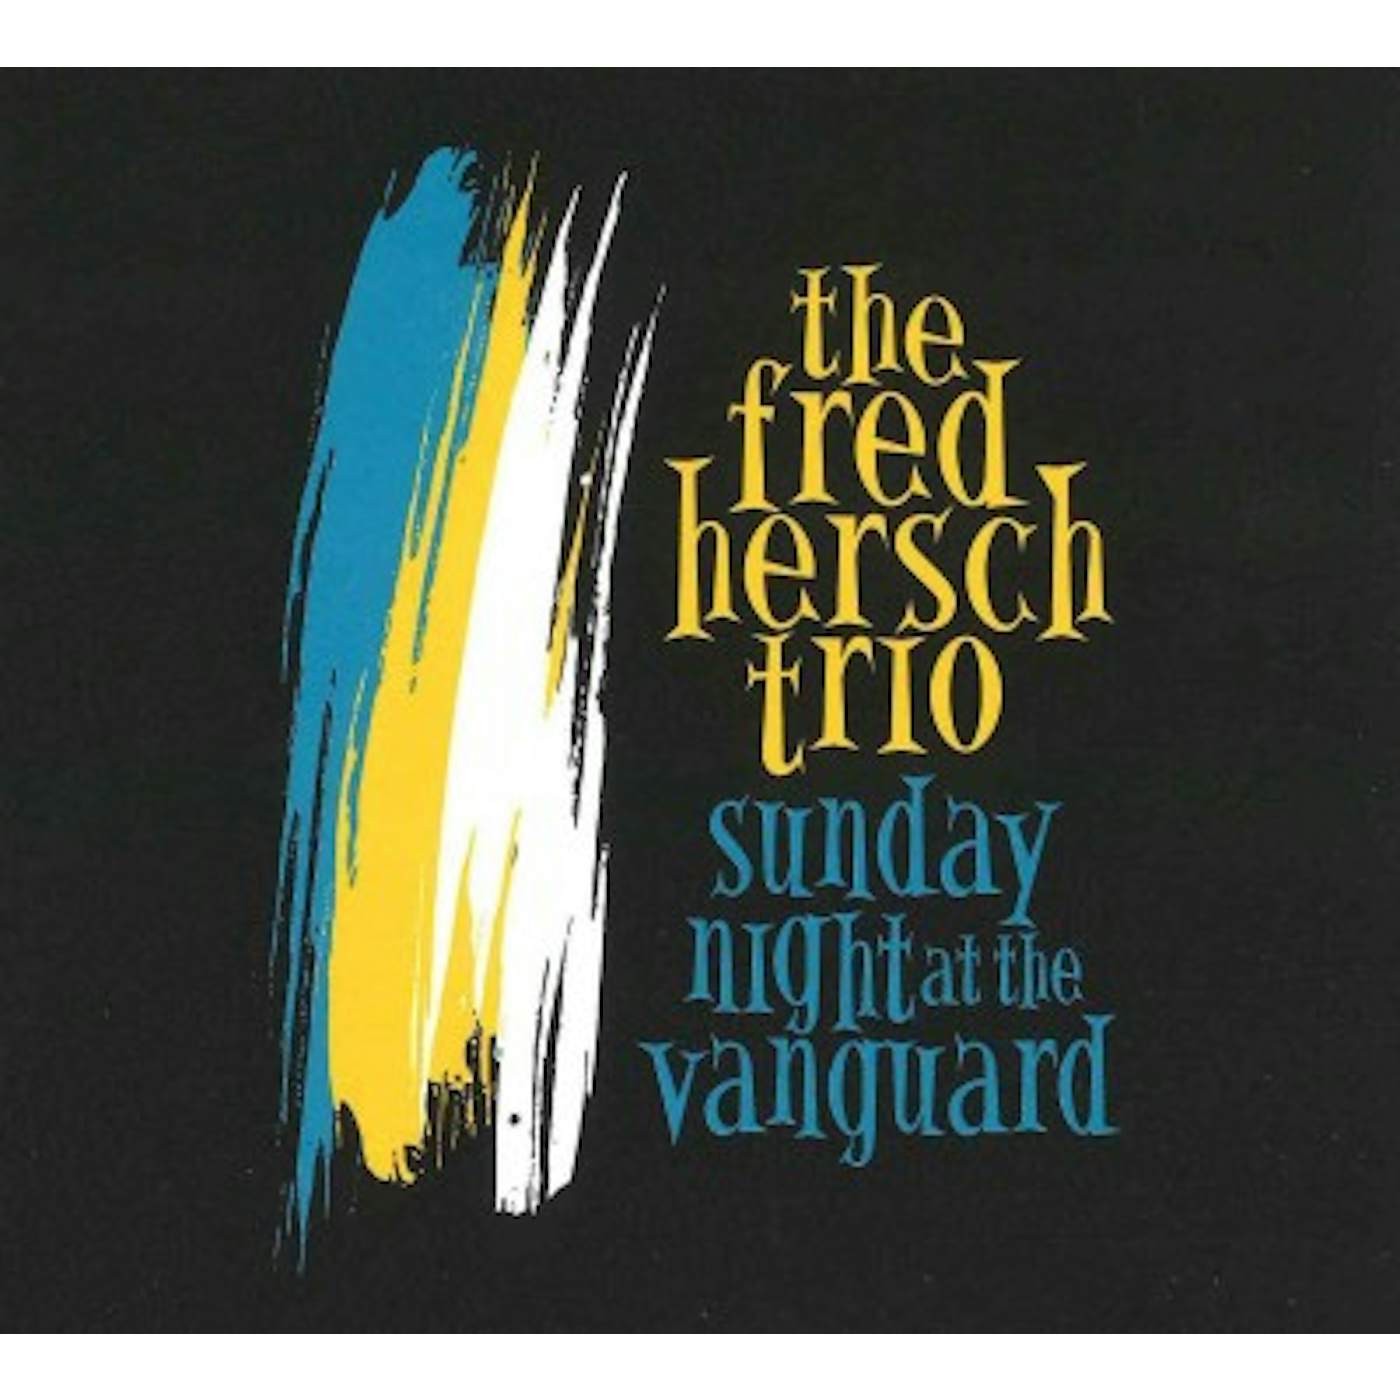 Fred Hersch SUNDAY NIGHT AT THE VANGUARD CD